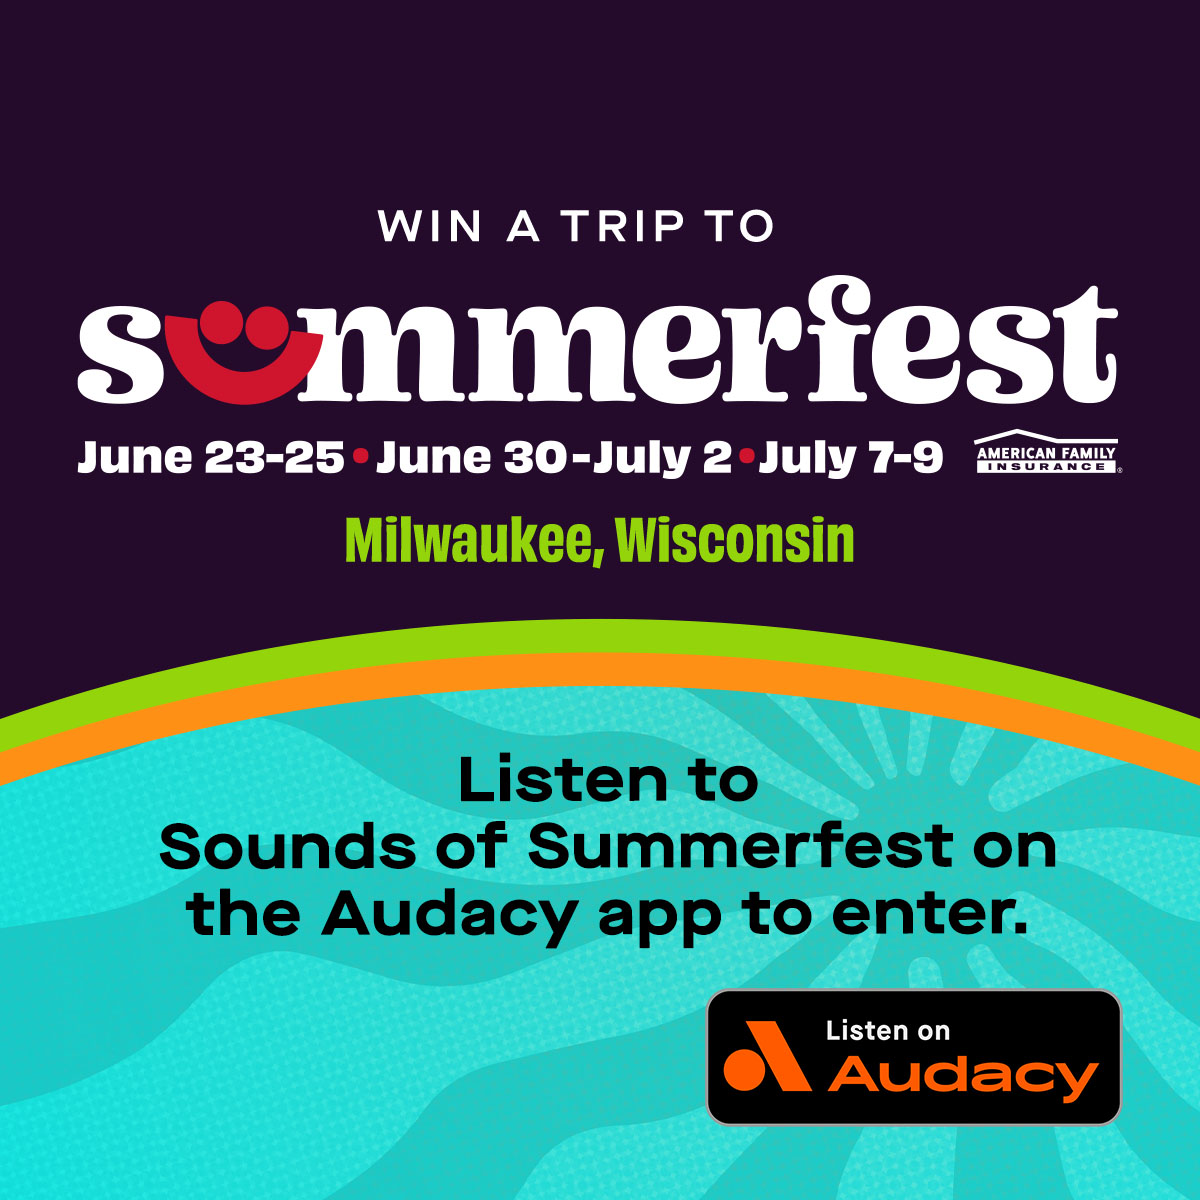 ☀️ You and a friend have the chance to win a two-night trip to @summerfest with performances by @machinegunkelly, @justinbieber, @avrillavigne + more! ☀️ 🎧 Tune in to ‘Sounds of Summerfest’ Radio to enter: auda.cy/Summerfest 📝 Contest Rules: auda.cy/SummerfestRules